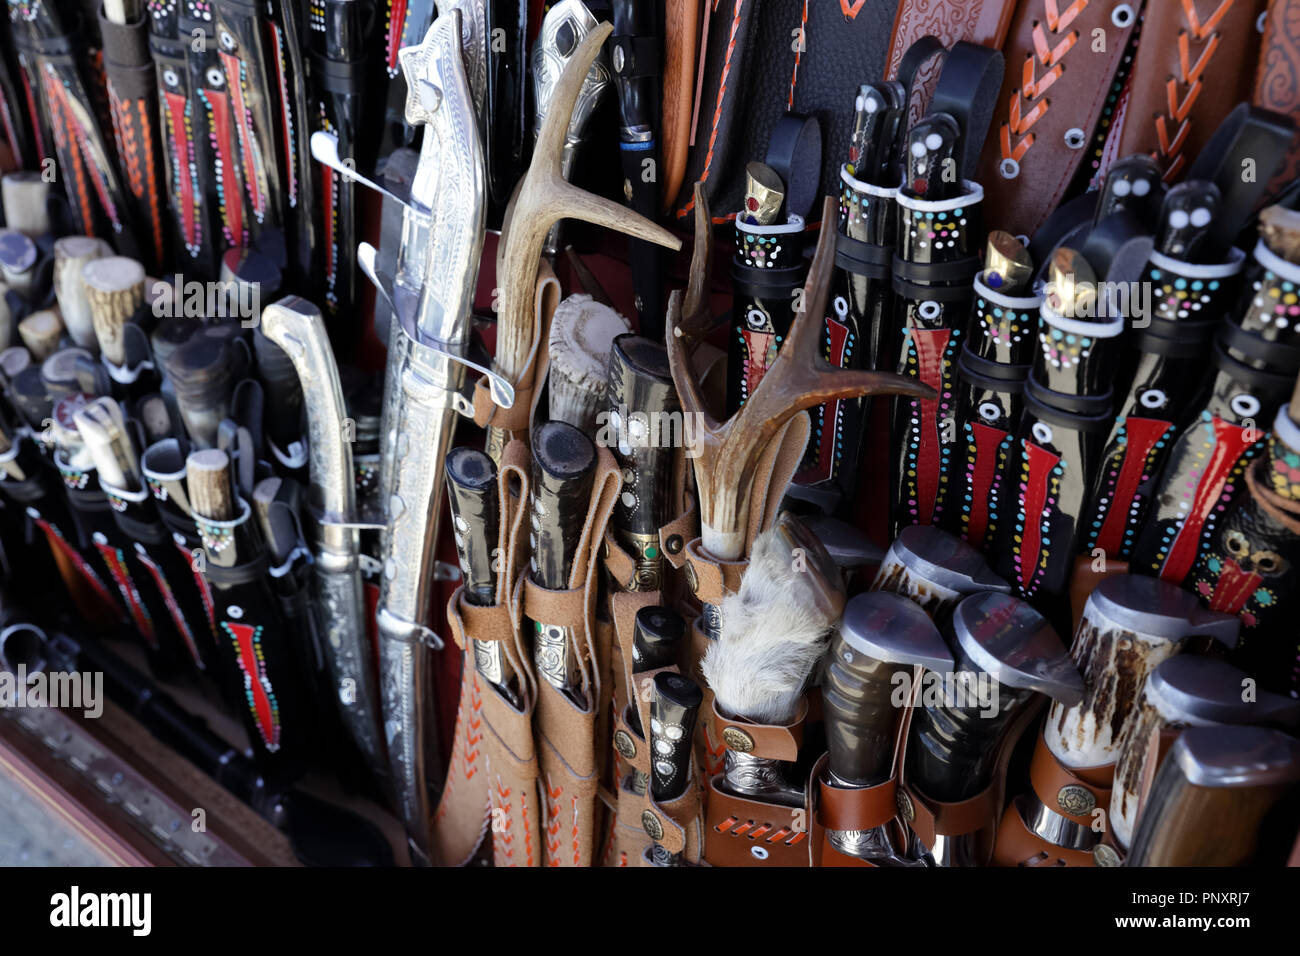 Close-up of traditional knives, daggers and swords used by Uzbeks of Central Asia. Stock Photo